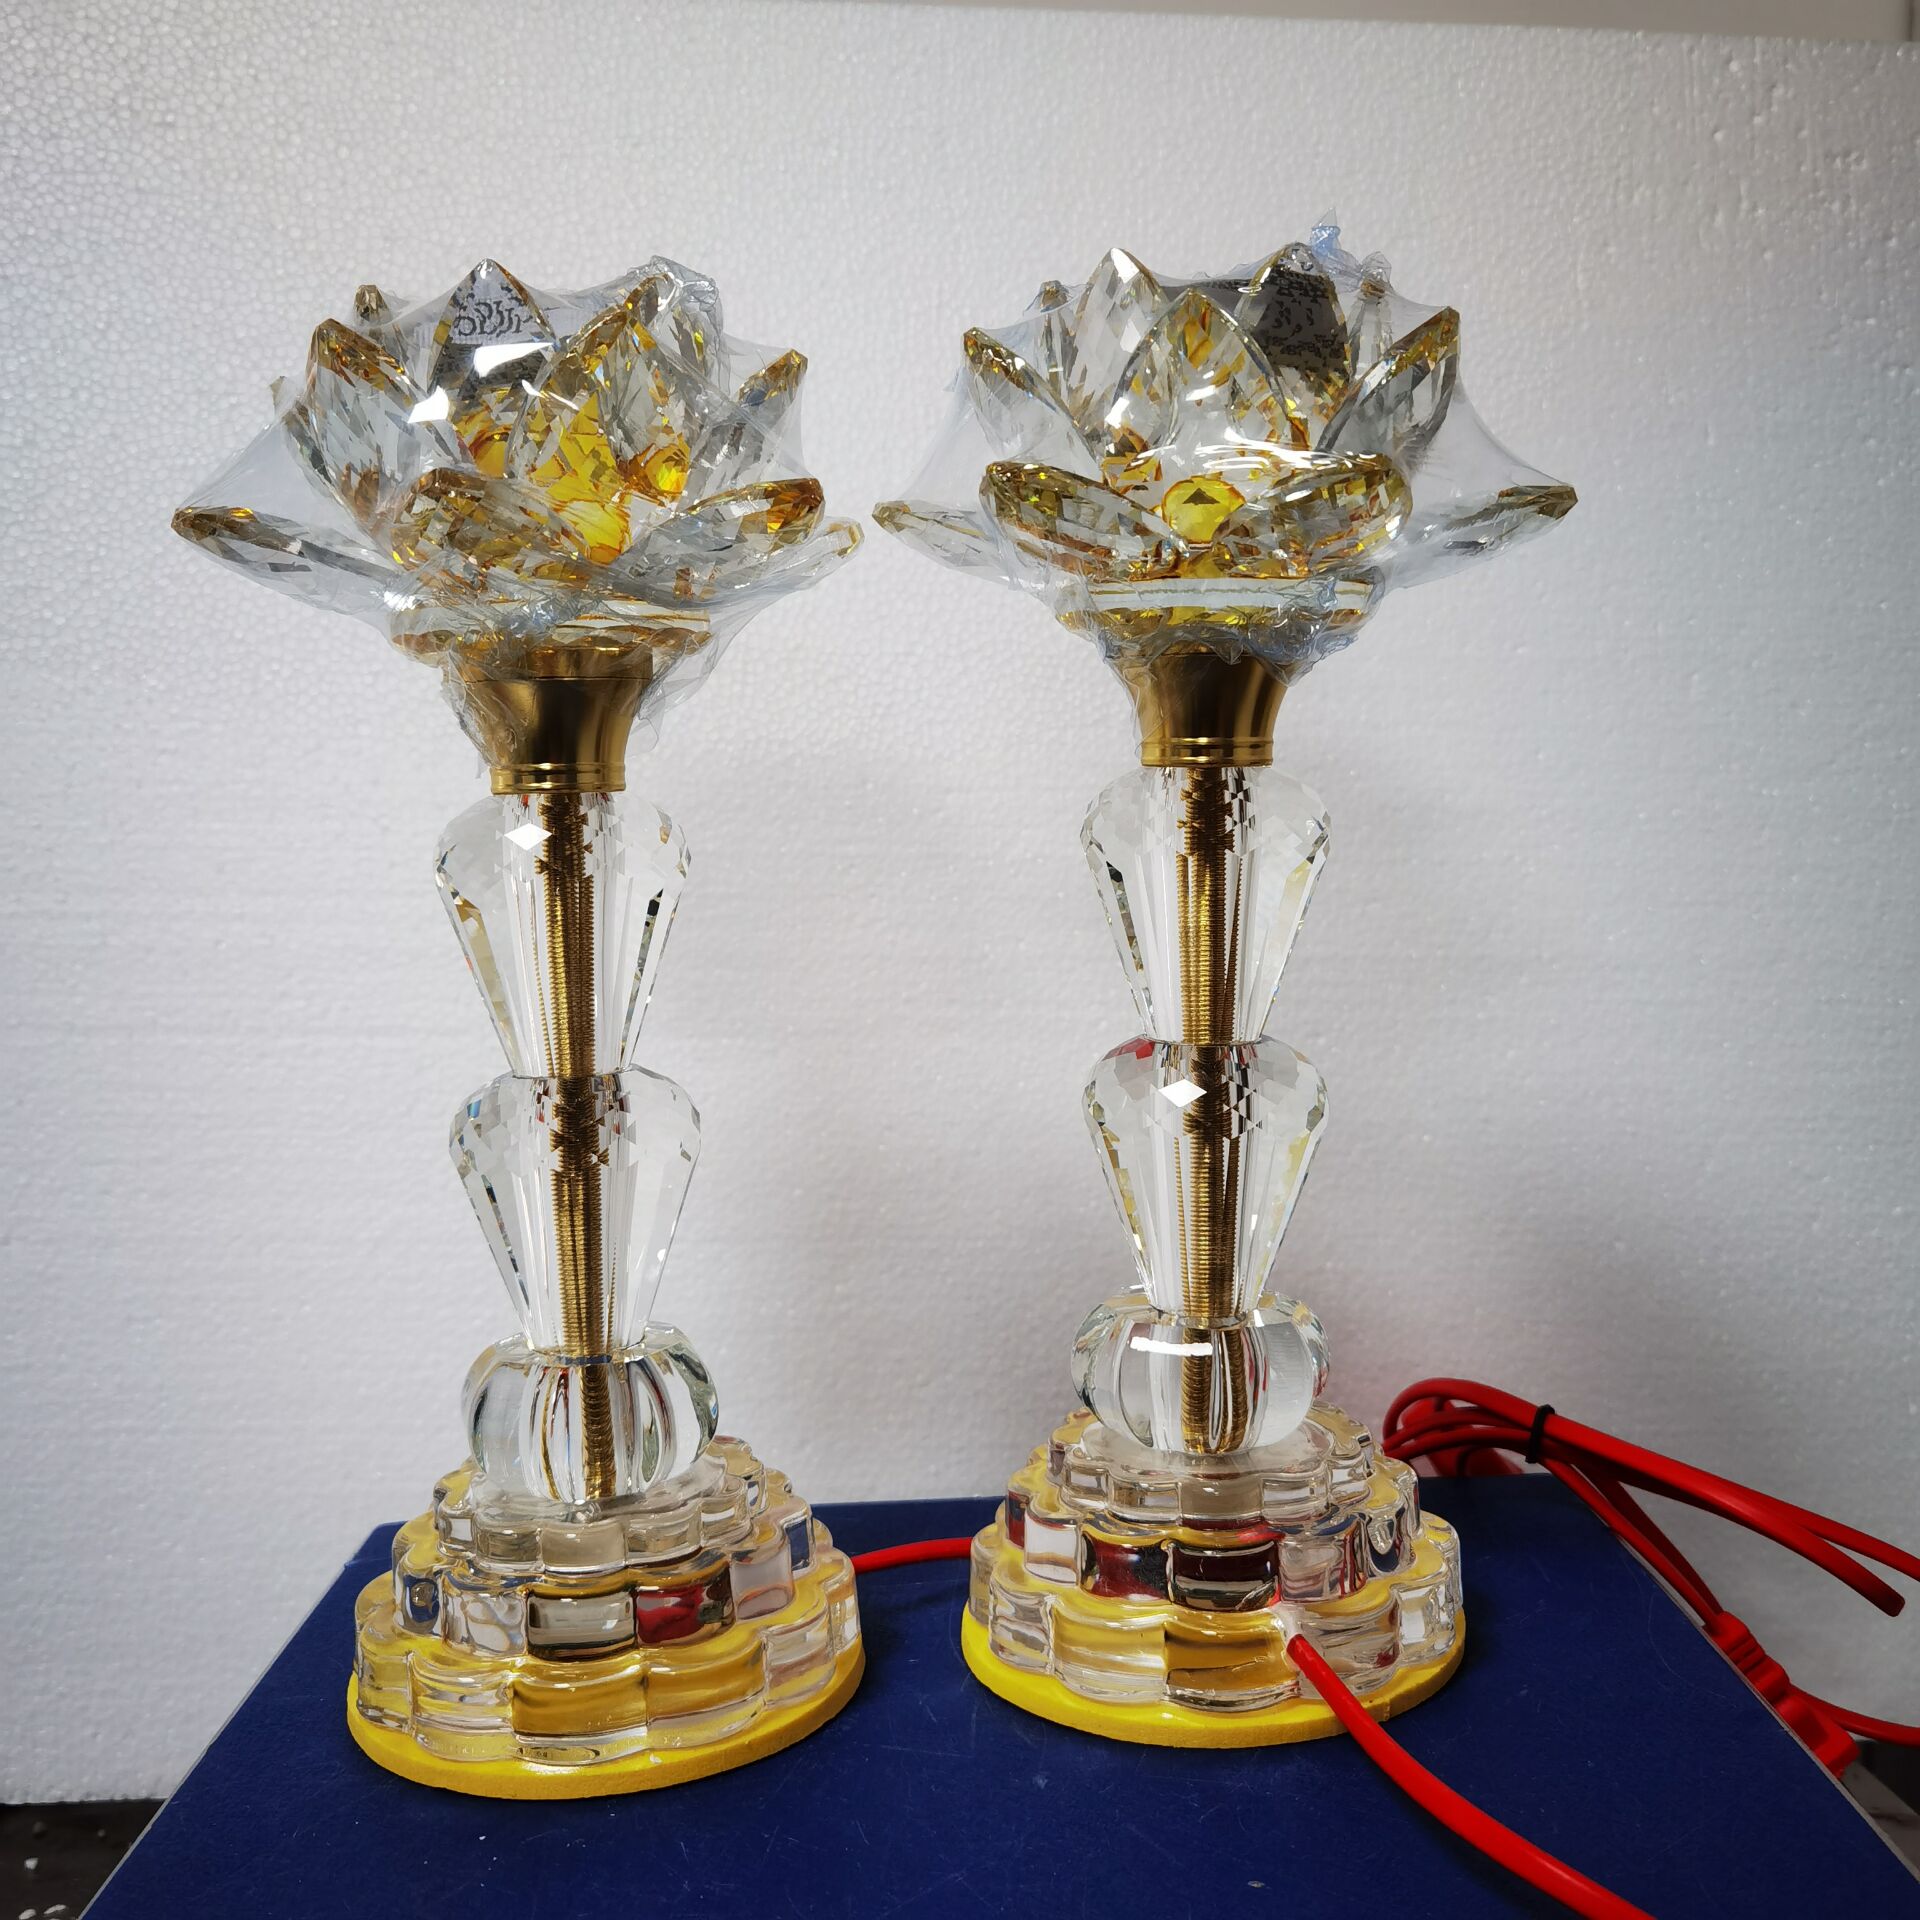 2pcs Crystal Colorful Lotus Lamp Decoration Home Plug-in Lamp Accessories Buddha Hall Lamp Ornaments Traditional Supplies